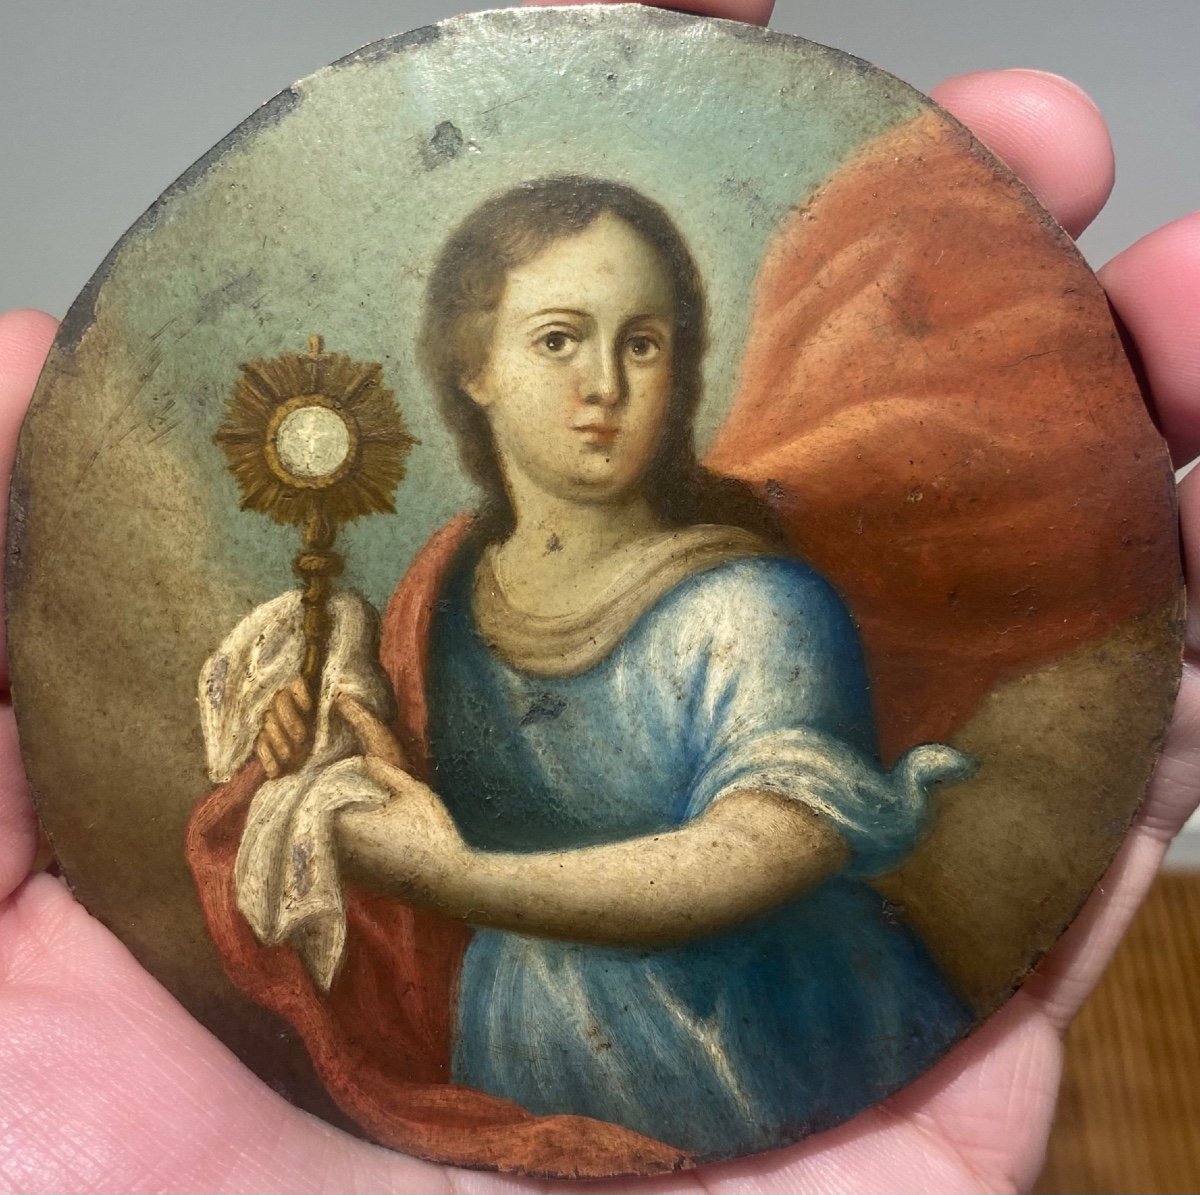 Lady With Guard. Oil On Copper. Spanish Or Mexican School Of The Seventeenth Century.